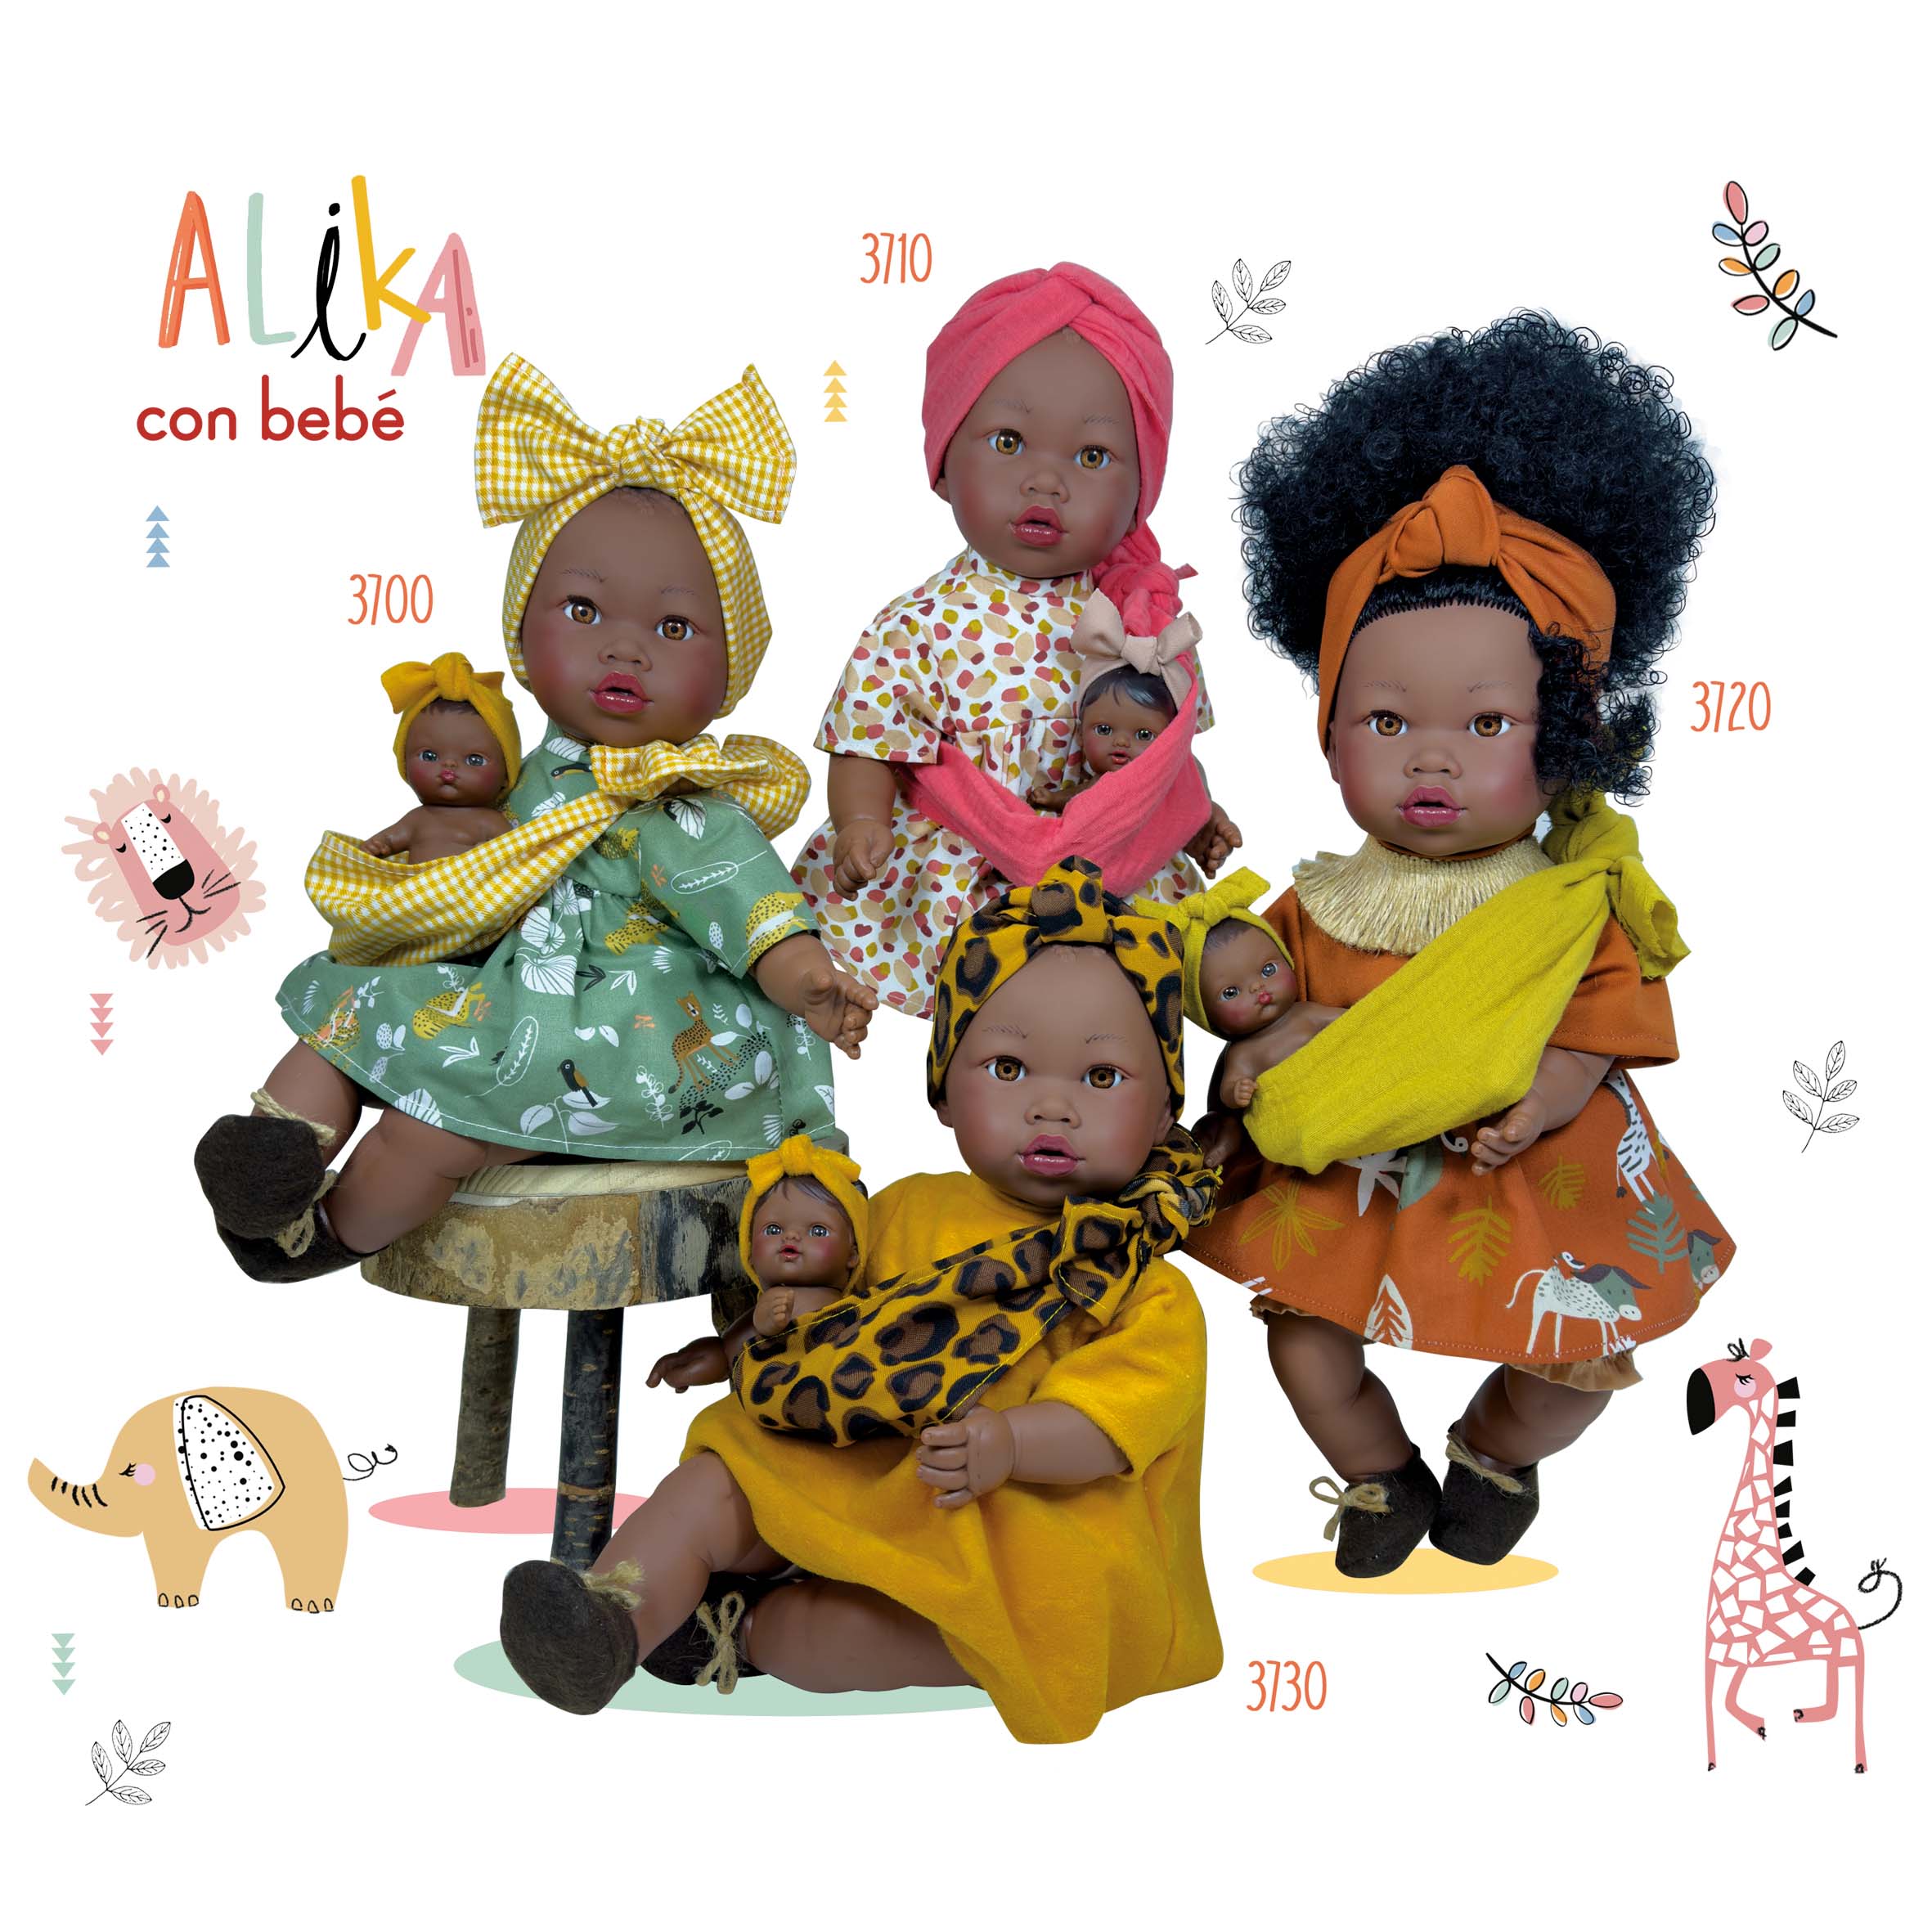 Handcrafted Alika Doll with Baby (3710) by Nines d&